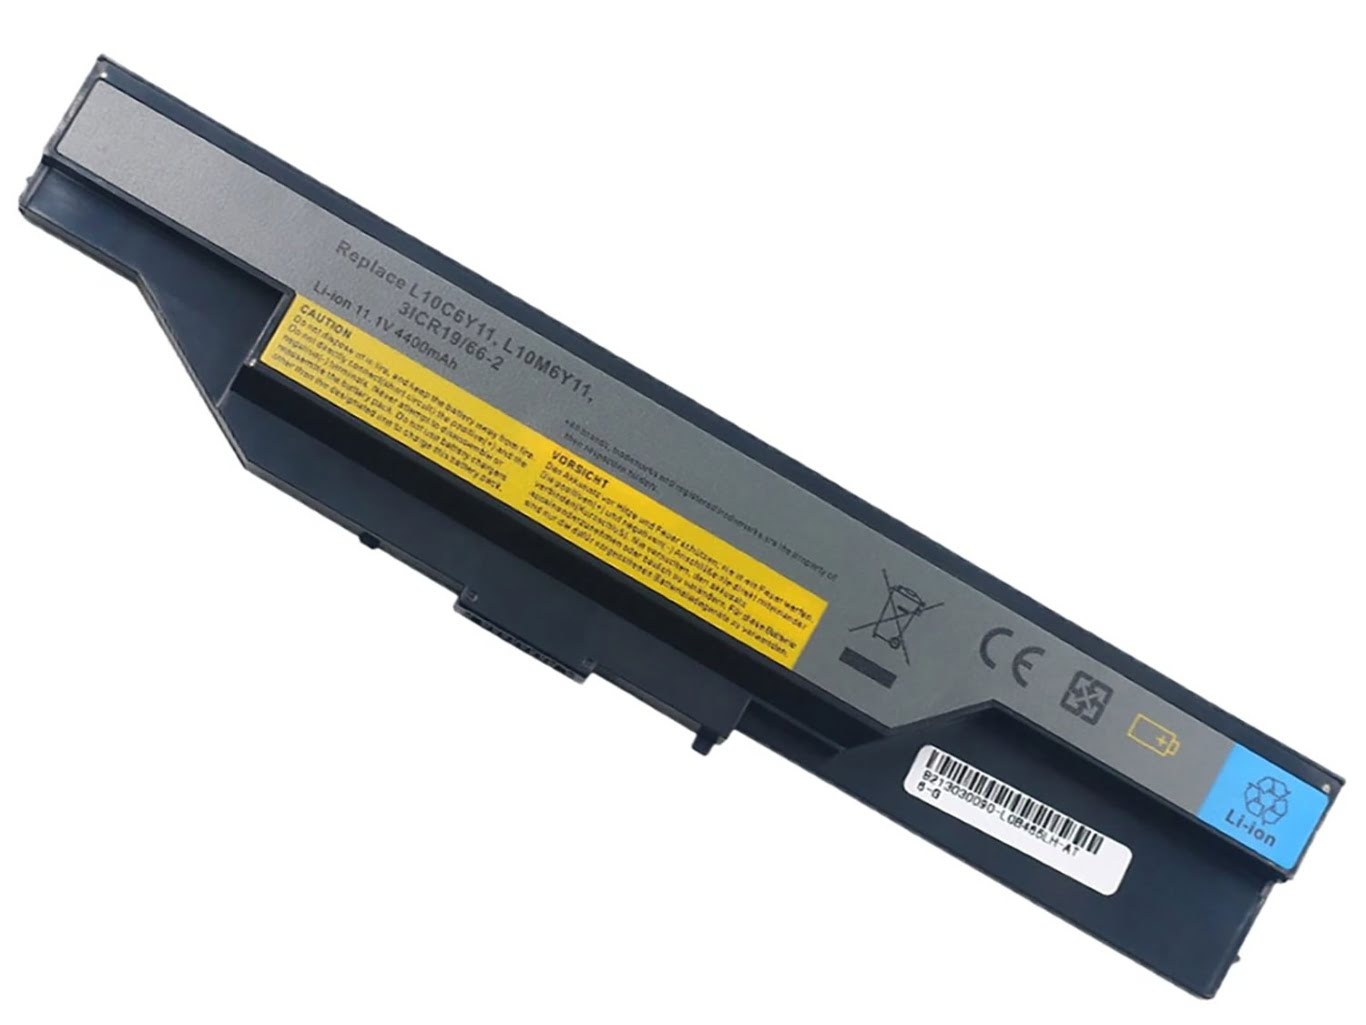 3ICR19/66-2, L10C6Y11 replacement Laptop Battery for Lenovo B465, B465A, 48wh, 6 cells, 11.1V